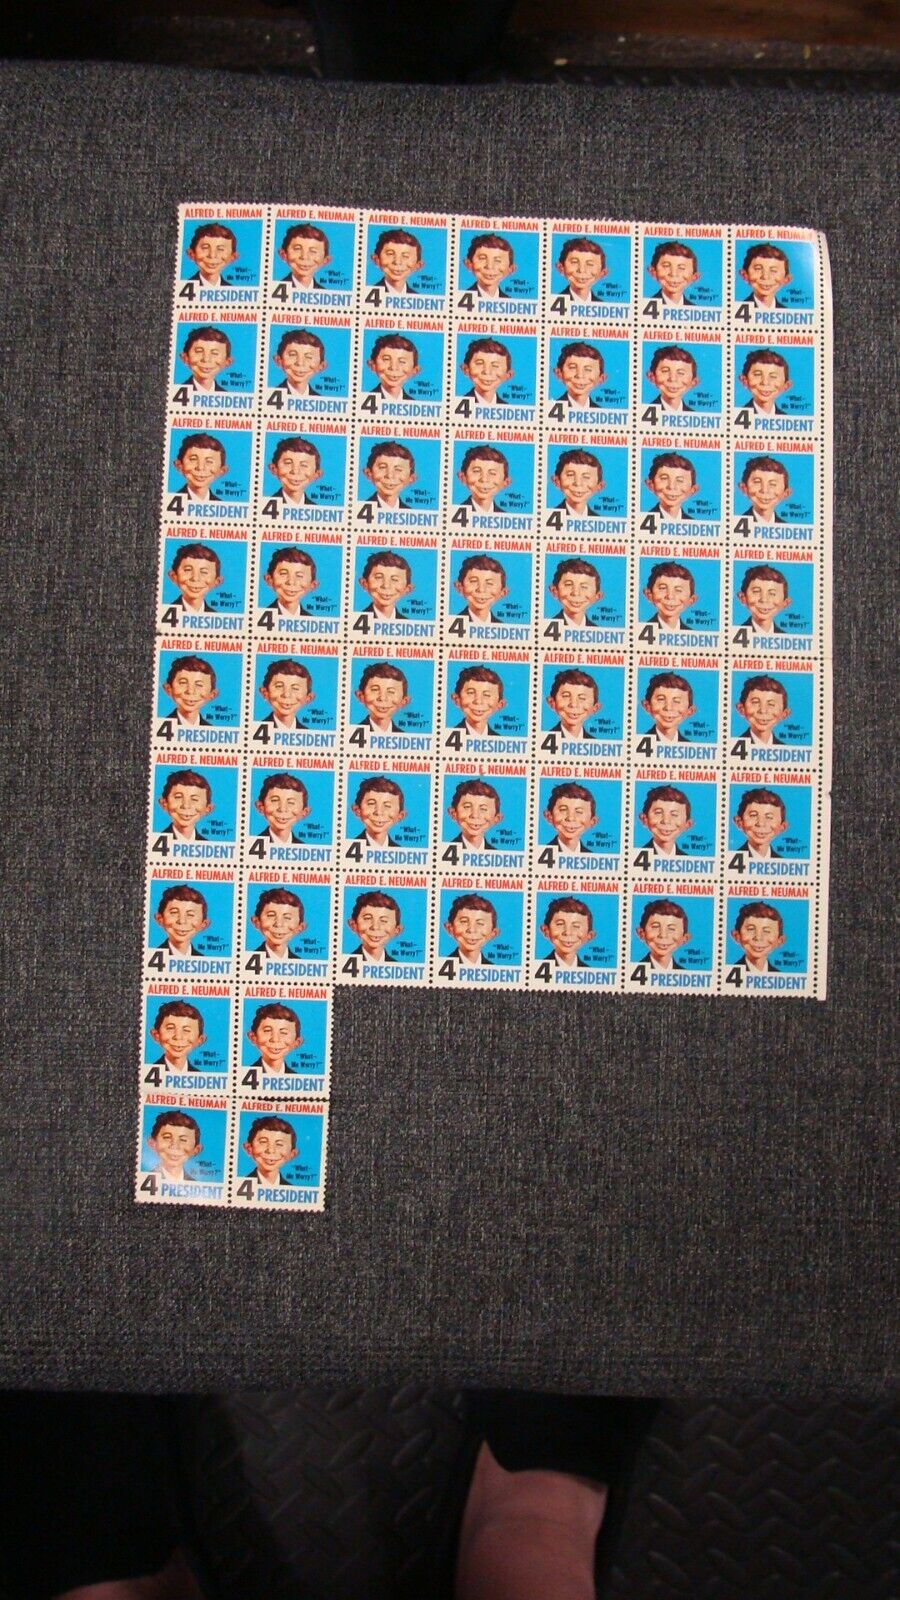 Vintage Mad Magazine Novelty Sheet of Alfred E Newman For President Stamps 1970s